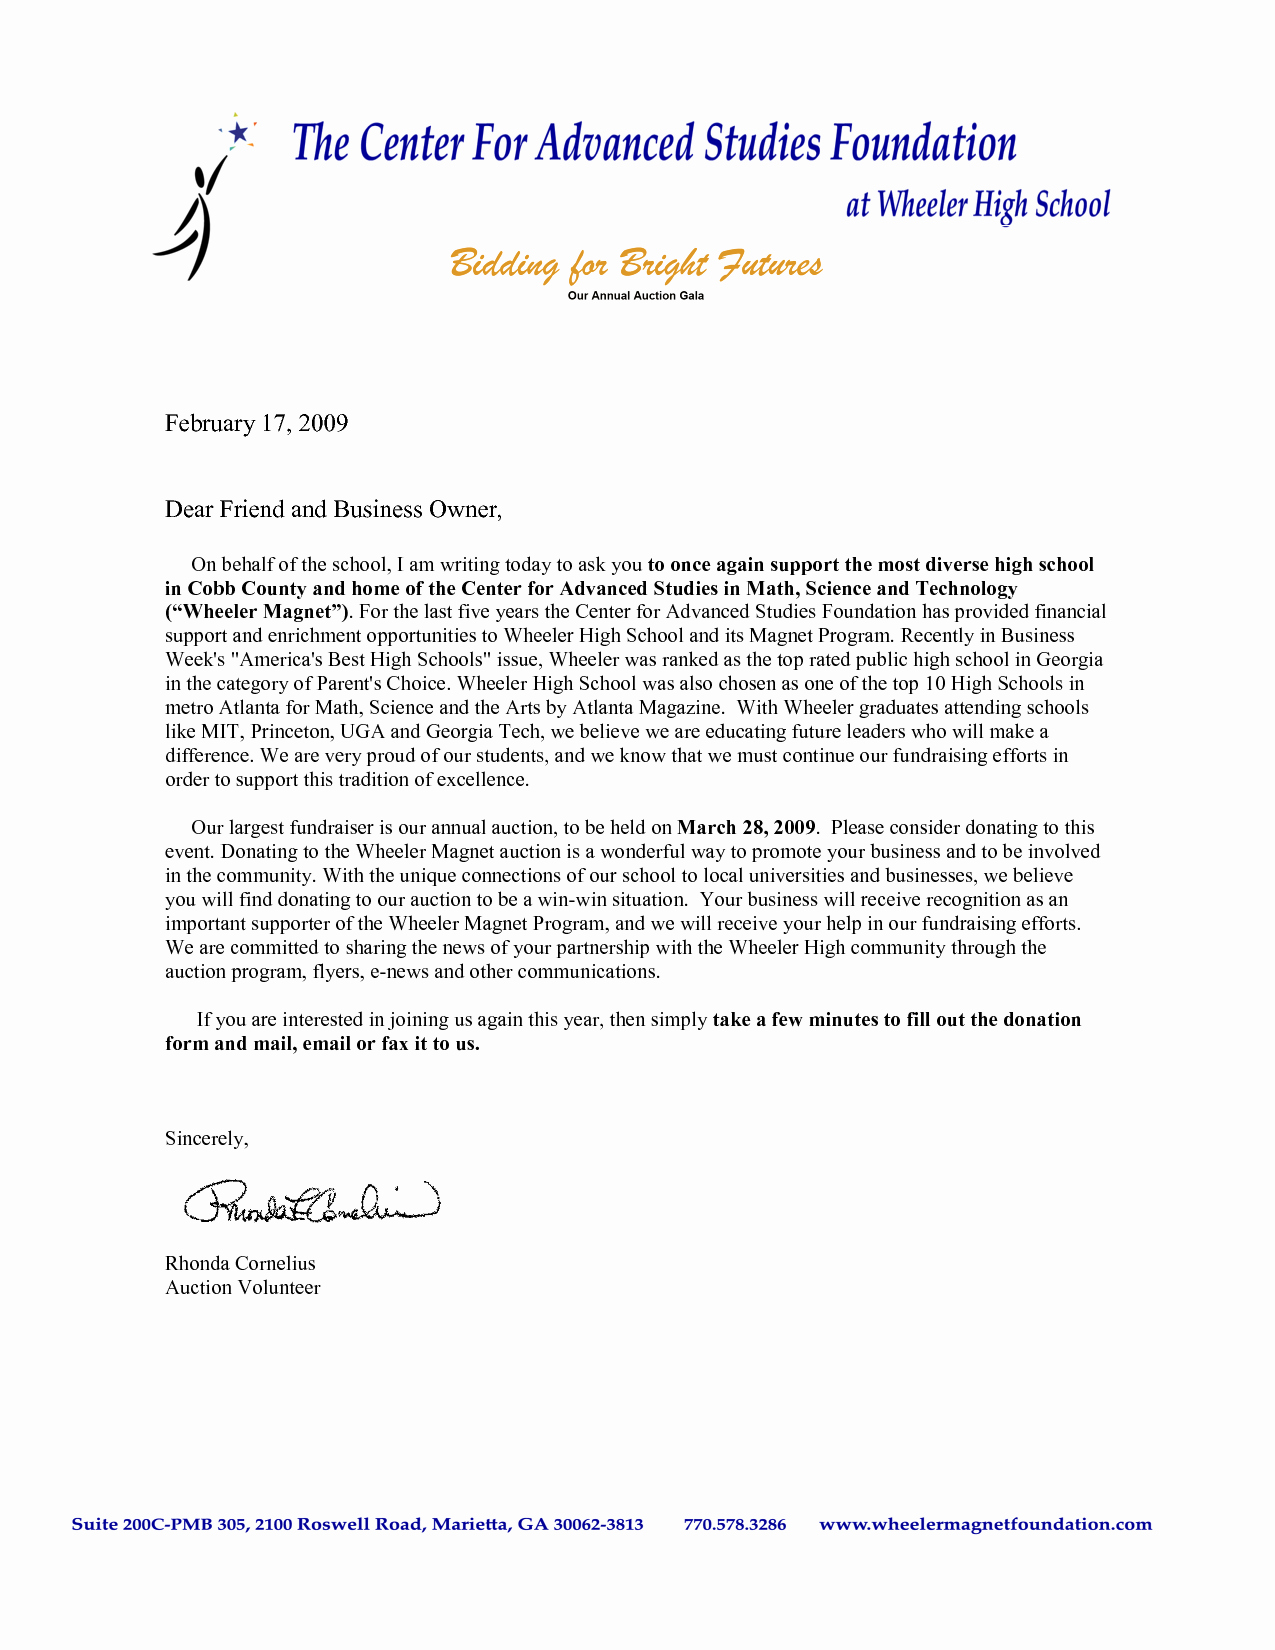 Sample Donation Request Letter Inspirational Sample Donation Request Letter for School